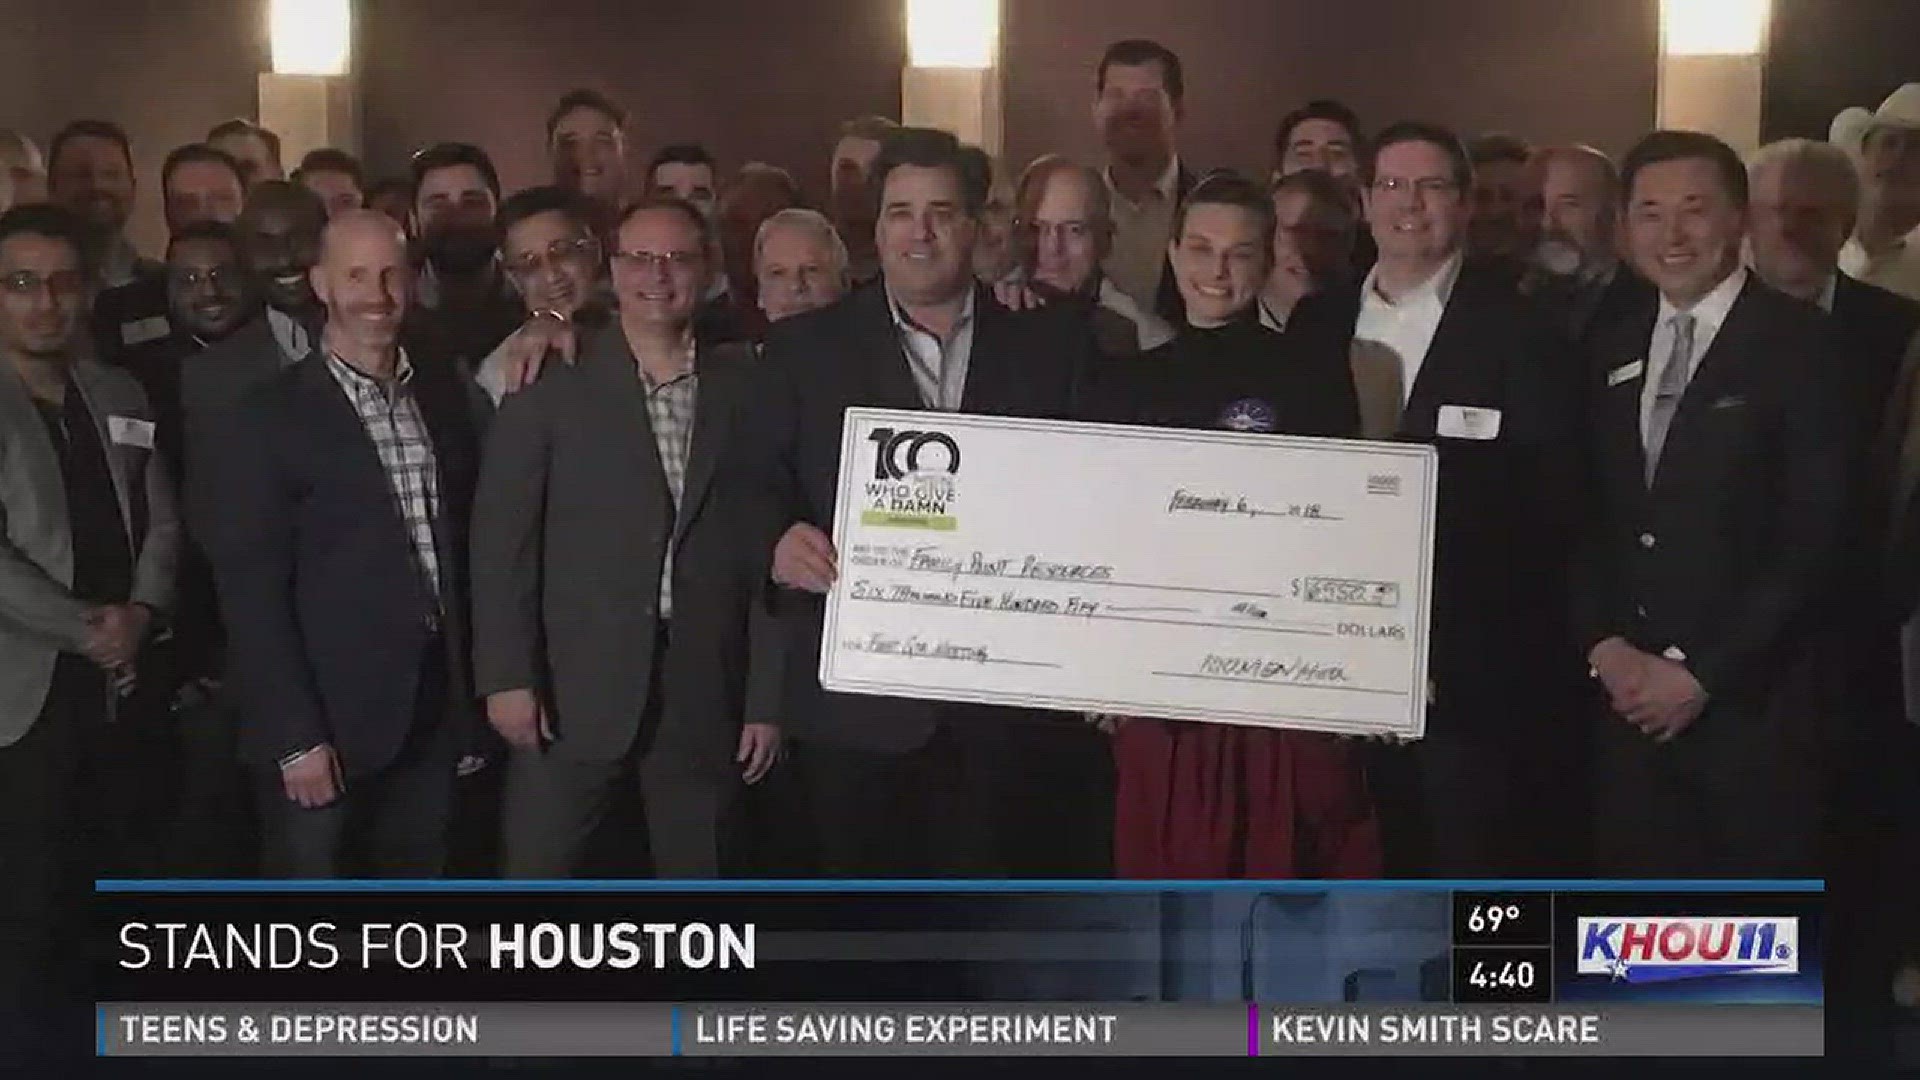 In the past two years, the Houston chapter of 100 Men Who Give a Damn has raised over $58,000 for local charities.